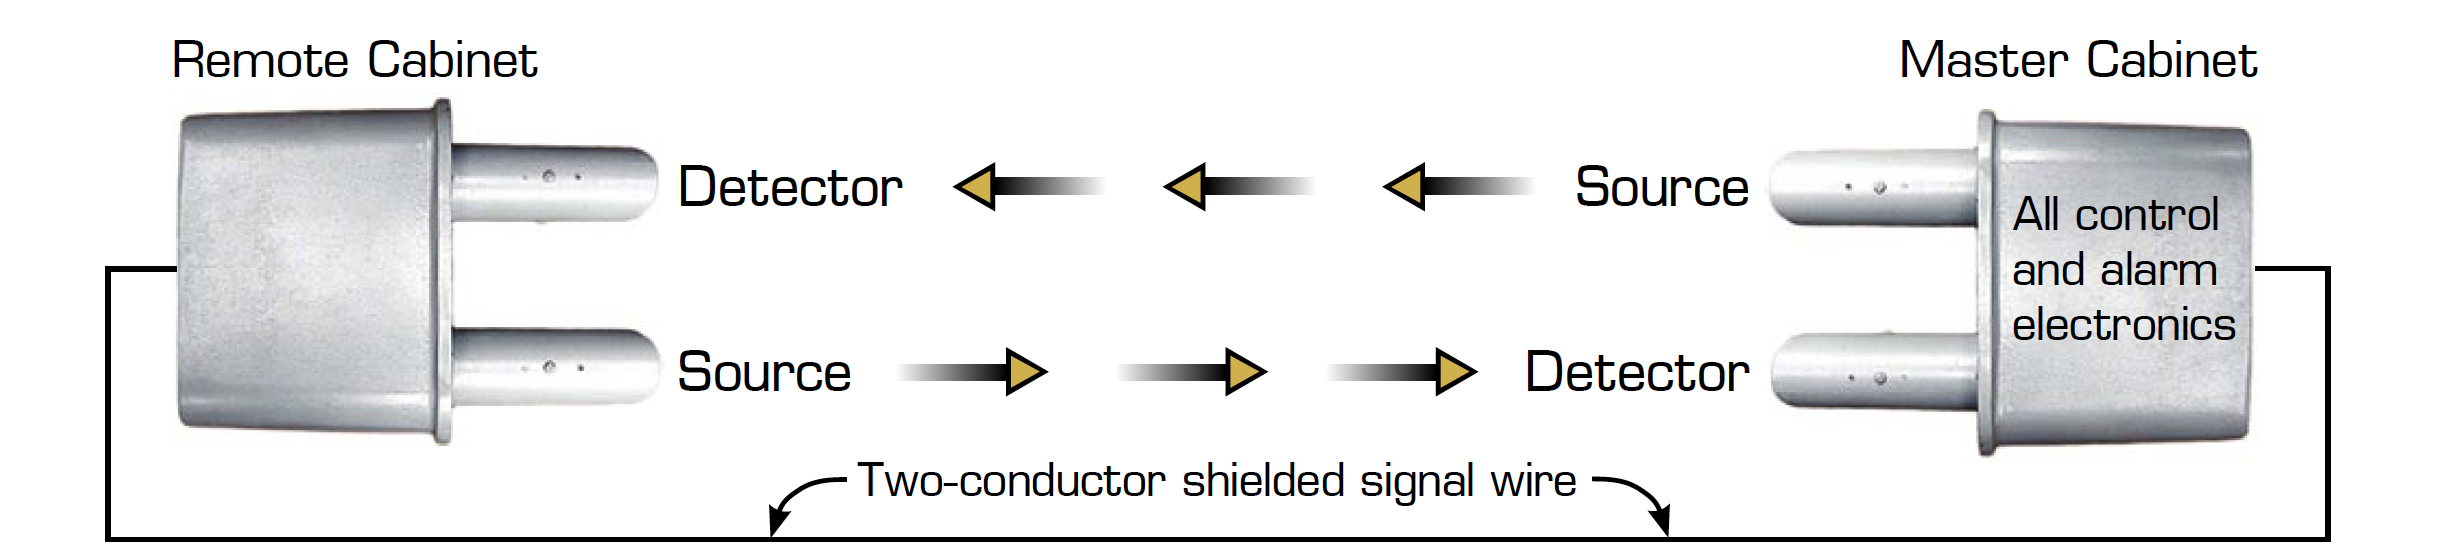 Z-Pattern OVHDS two-conductor shielded signal wire diagram